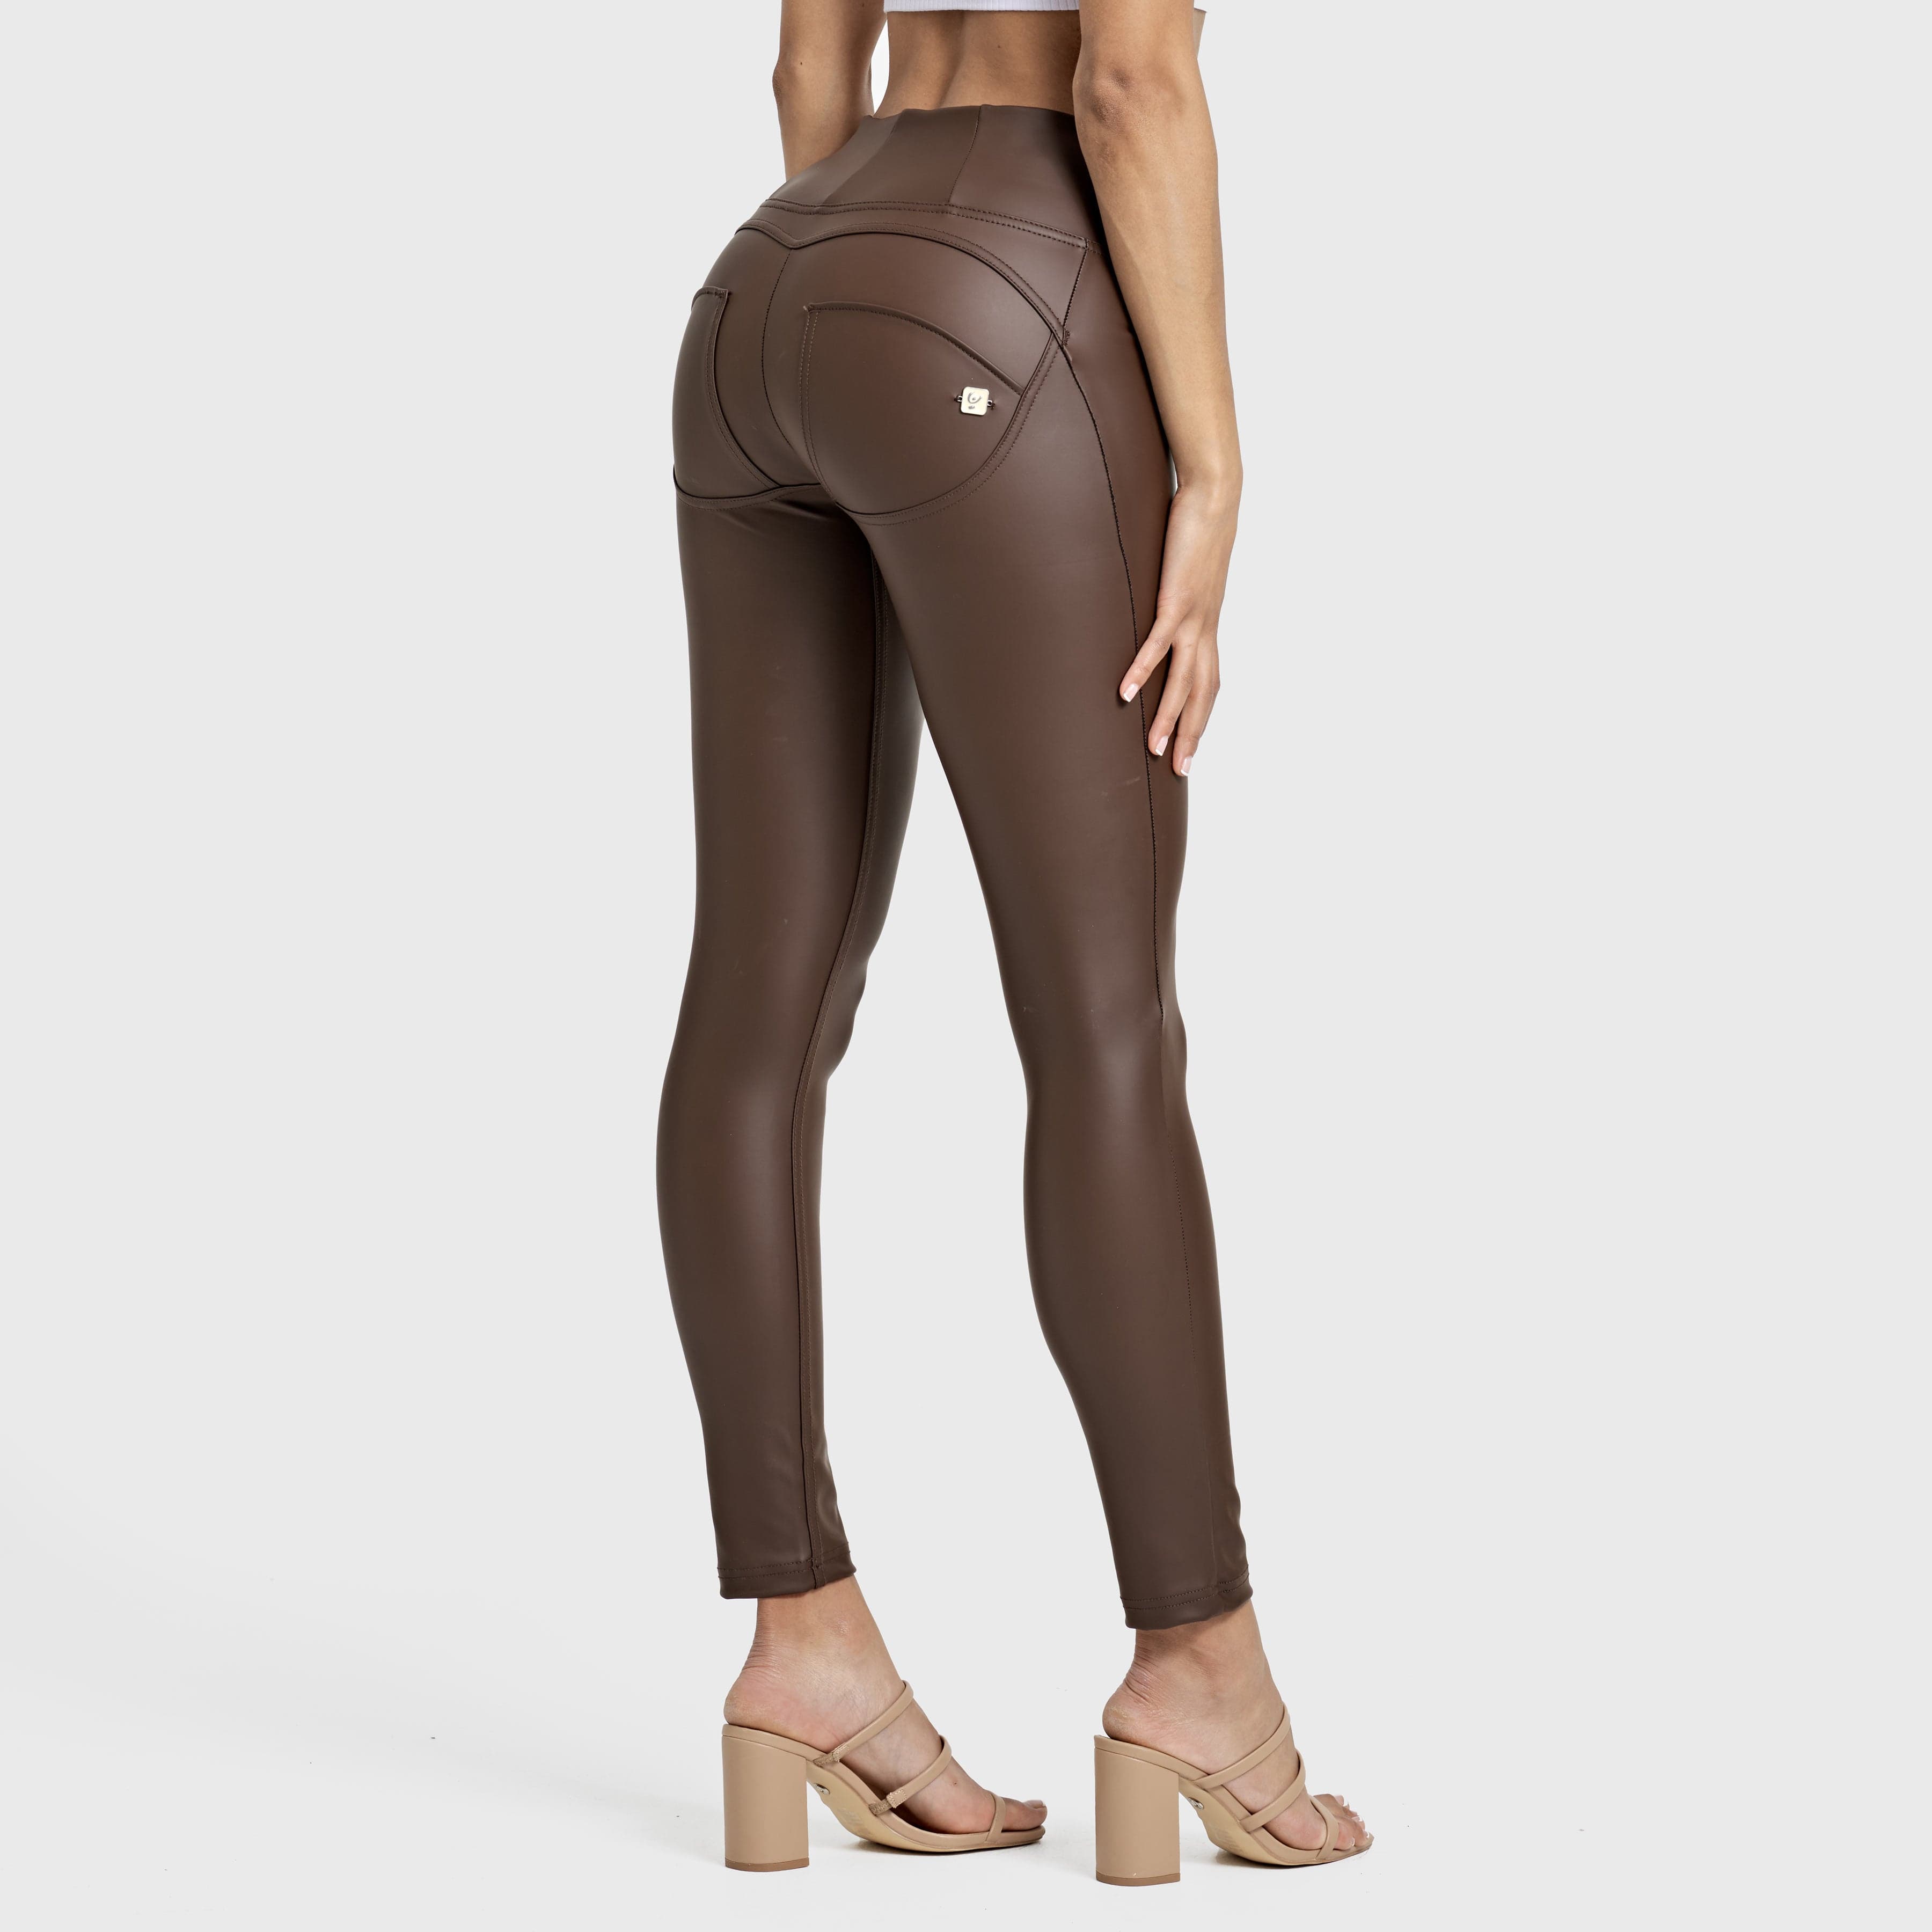 WR.UP® Faux Leather - High Waisted - Full Length - Chocolate 2